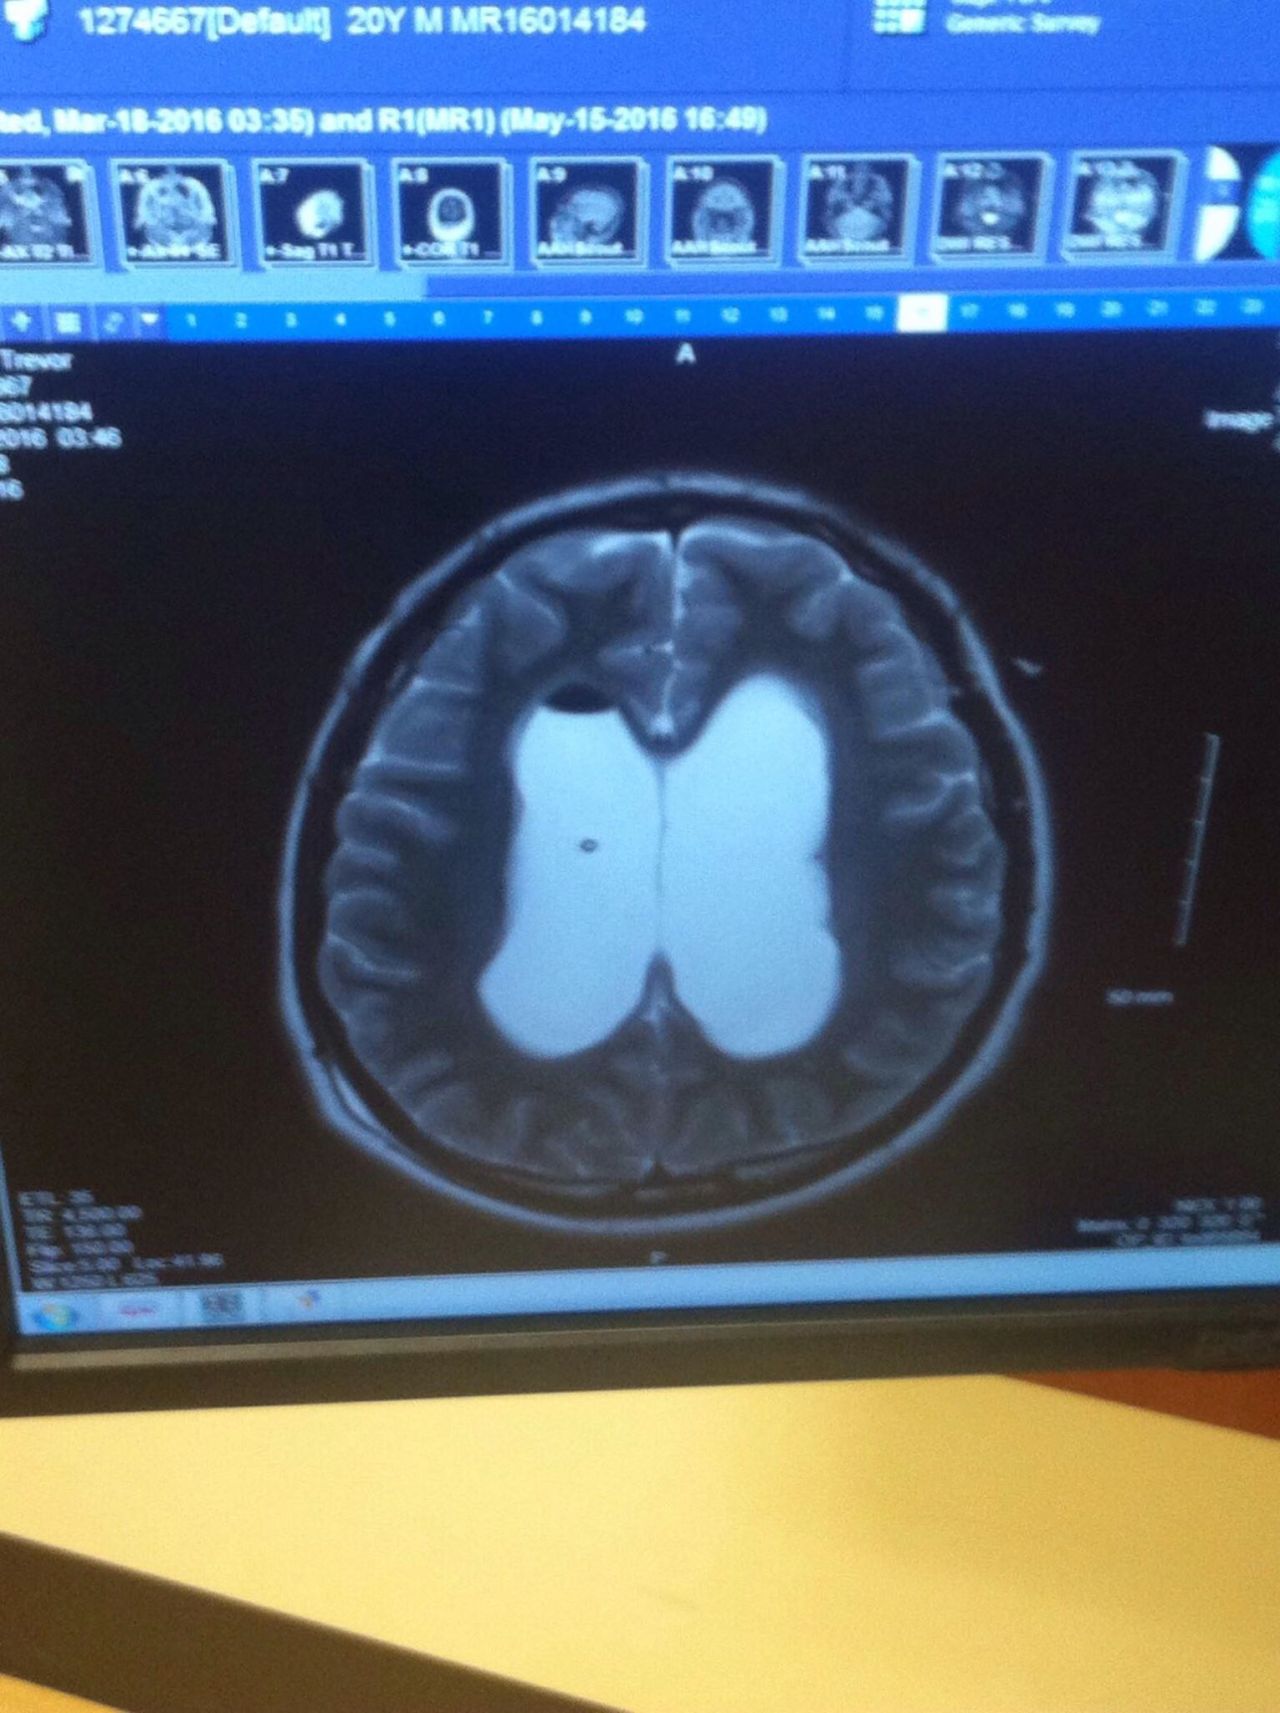 humanberry:  justsomeantifas:  My little brother has brain cancer We found out in 2016: see that little dot piece of shit, that’s the cancer that has been destroying his life,  he has Ŭk of medical expenses medicaid wont cover because the government